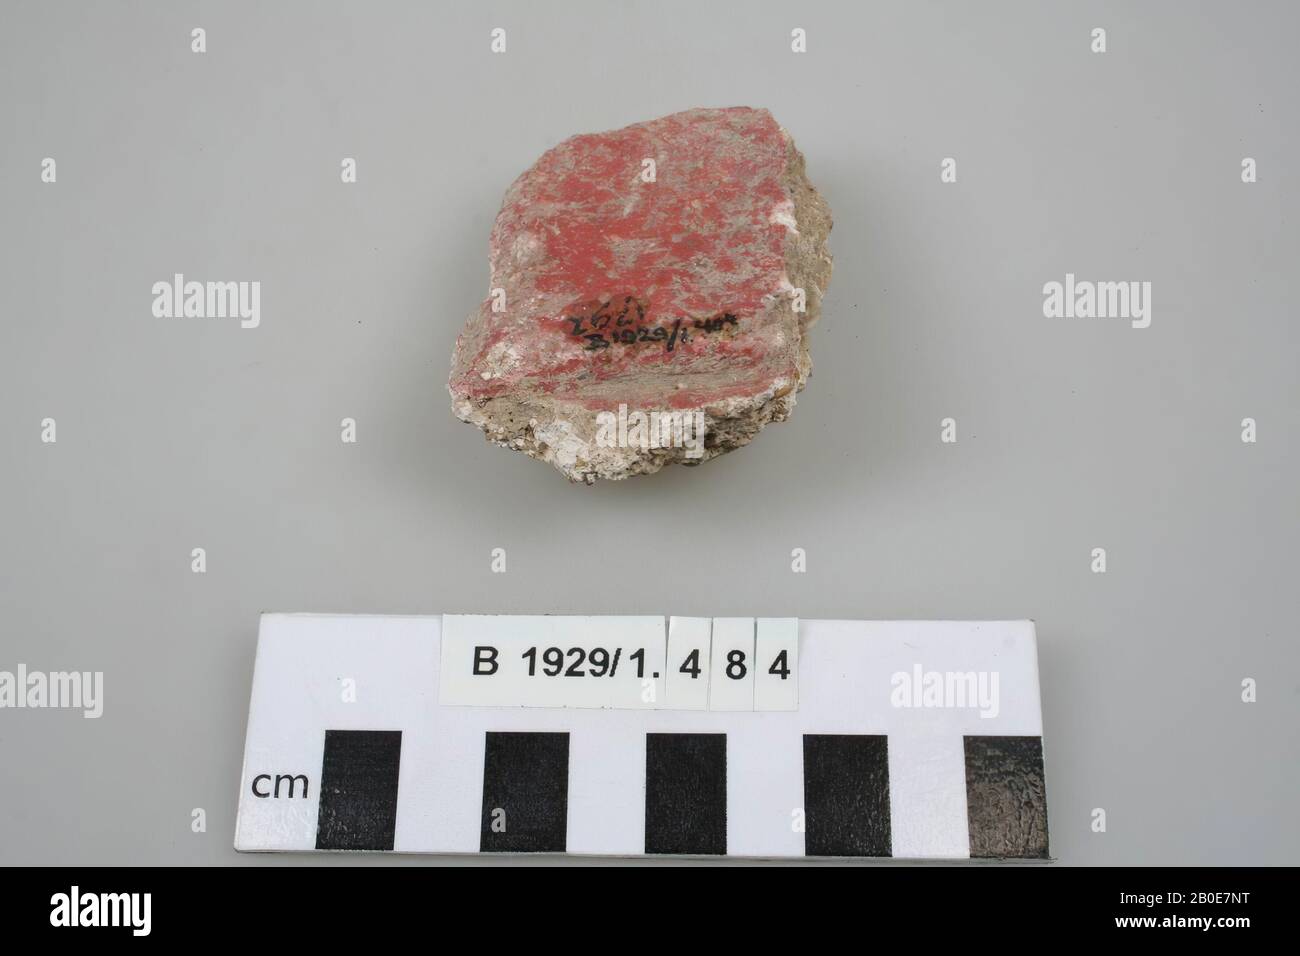 A piece of wall plaster, painted with red paint., Varia, lime mortar, L 6.5 cm, W 4.9 cm, Palestine Stock Photo